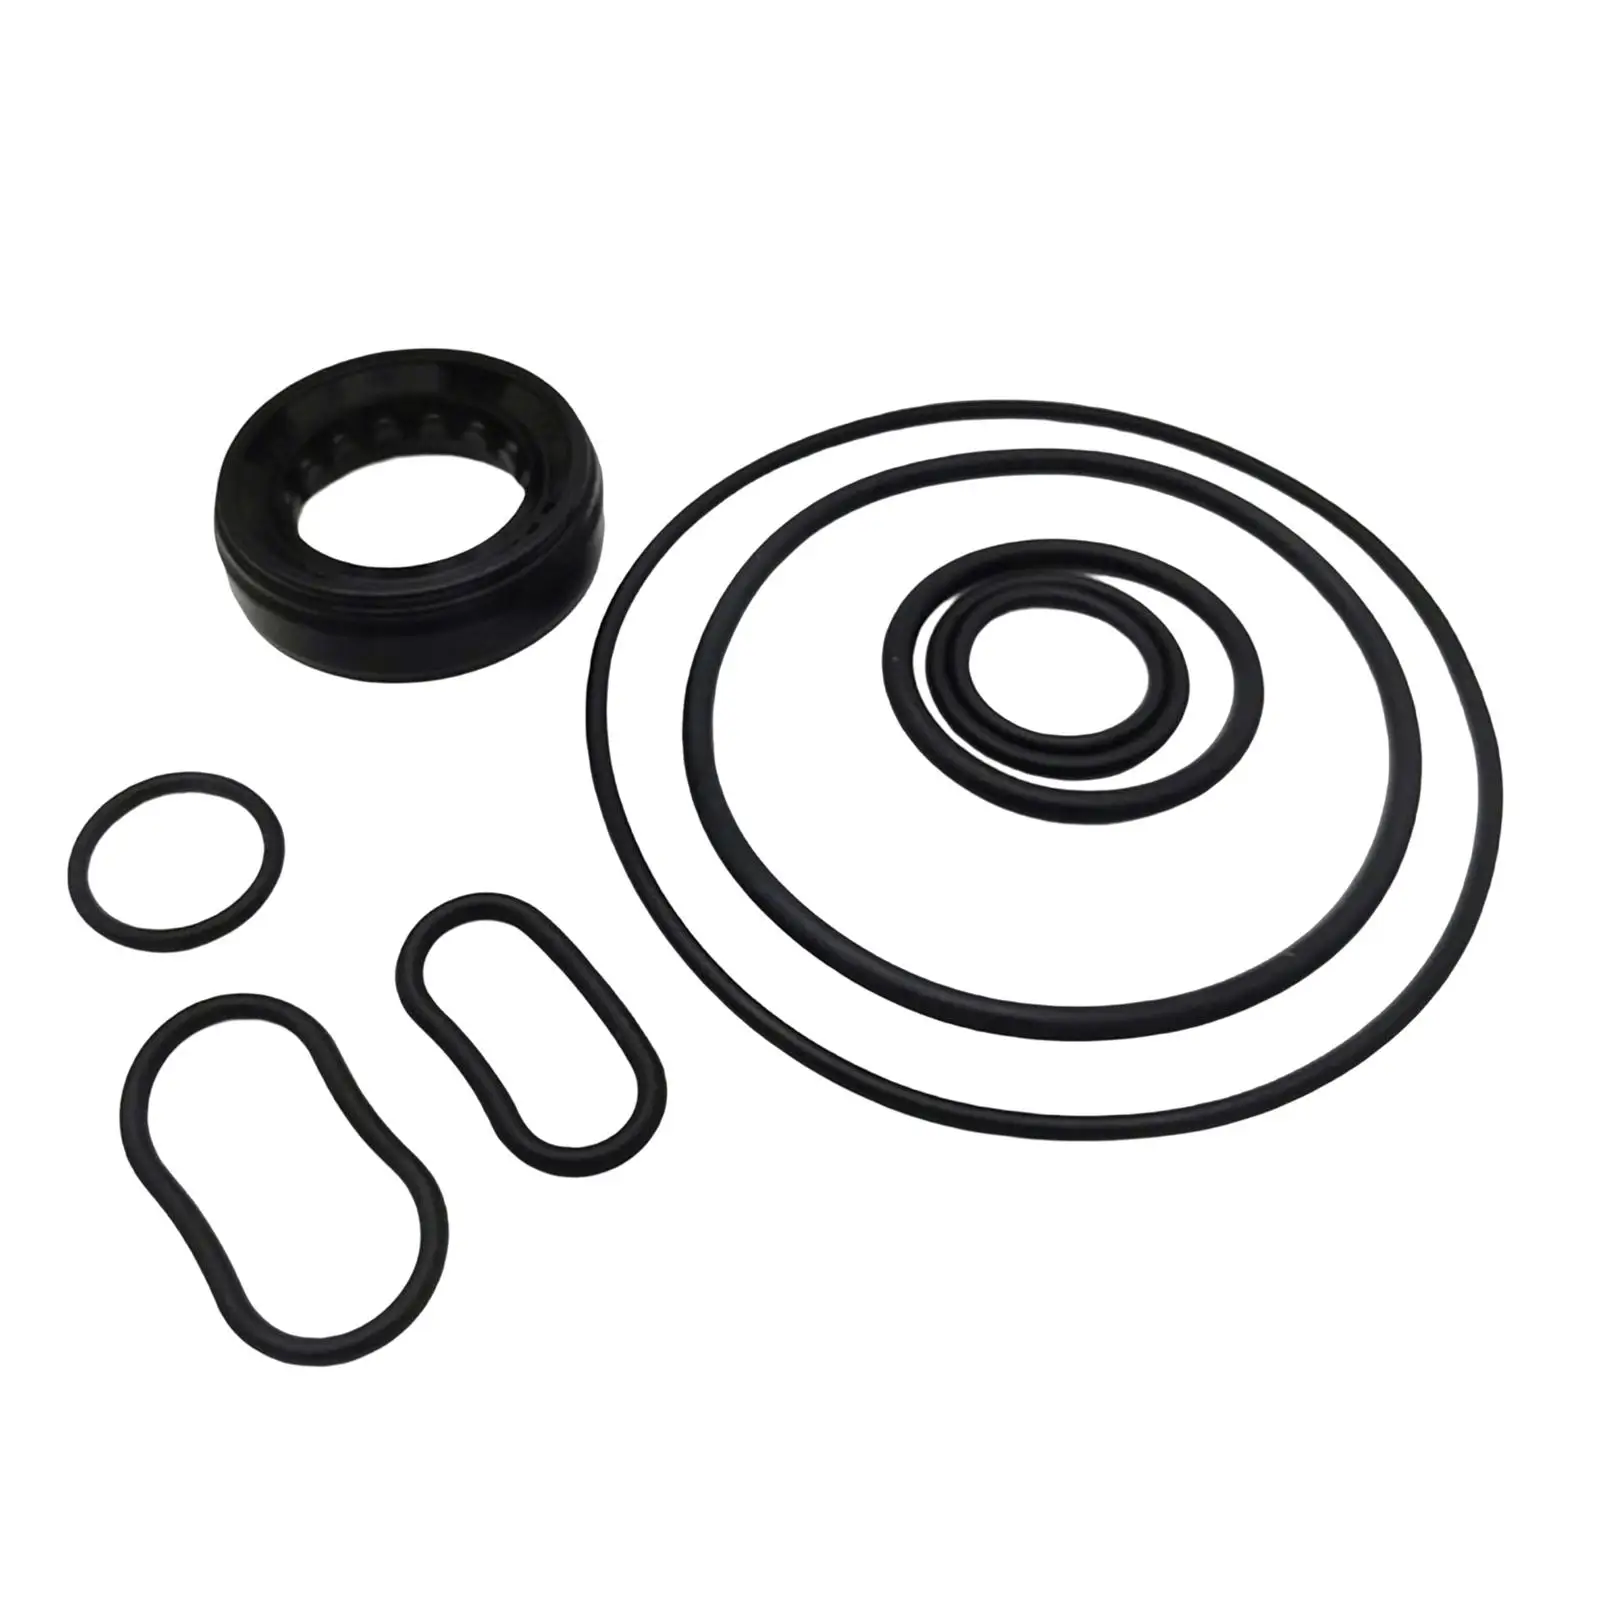 Power Steering Pump Seal Repair Set 06539-Pnc-003 Car Assembly Accessories Parts